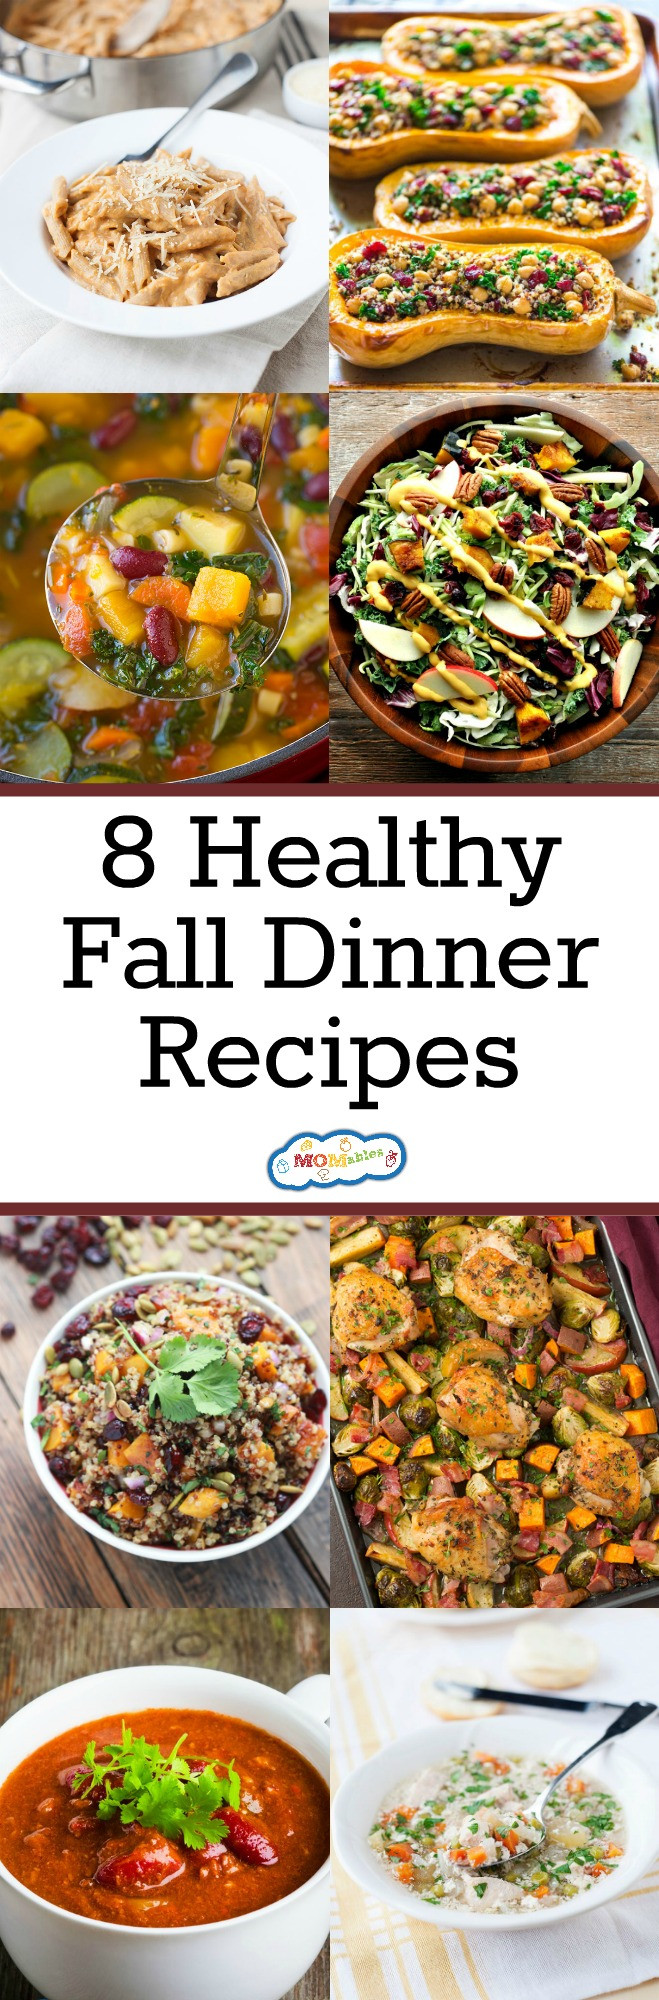 Fall Recipes Dinner
 8 Healthy Fall Dinner Recipes MOMables Good Food